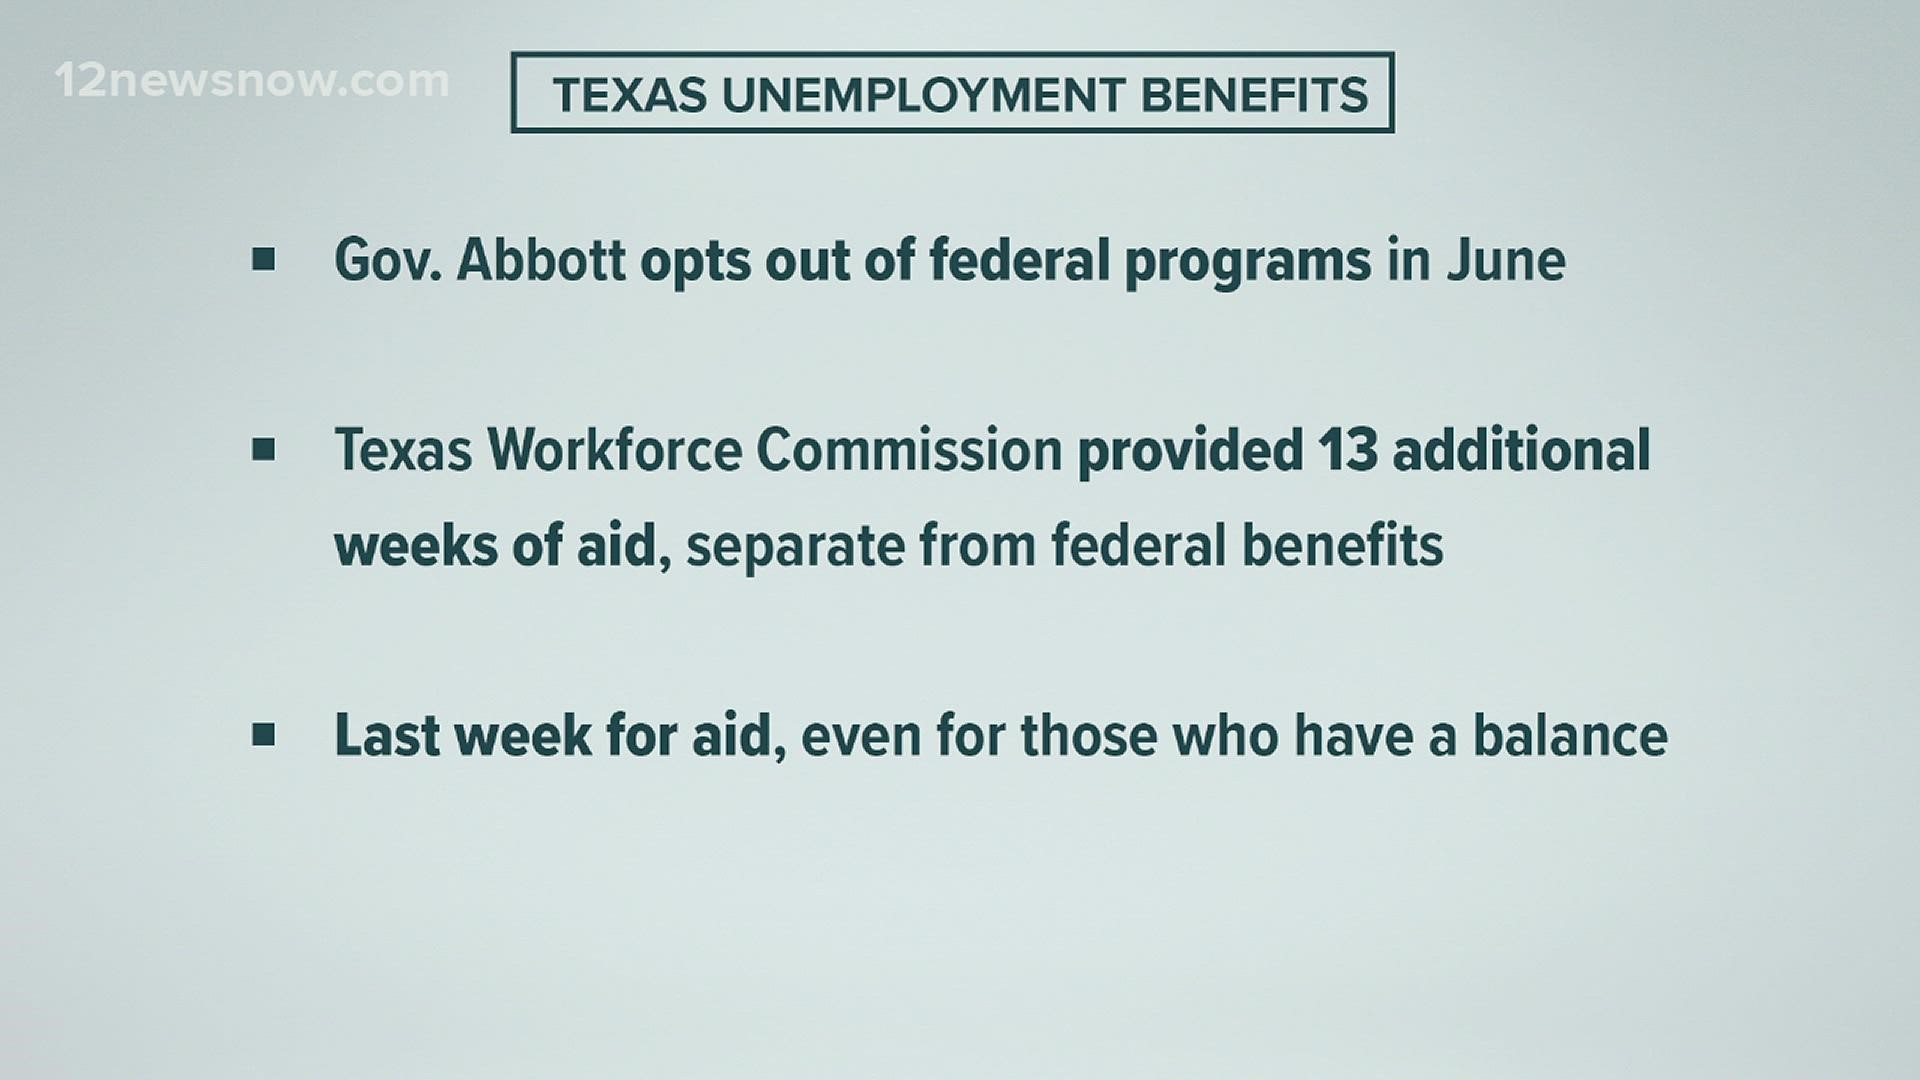 Texas Gov. Greg Abbott opted out of federal programs in June of 2021.